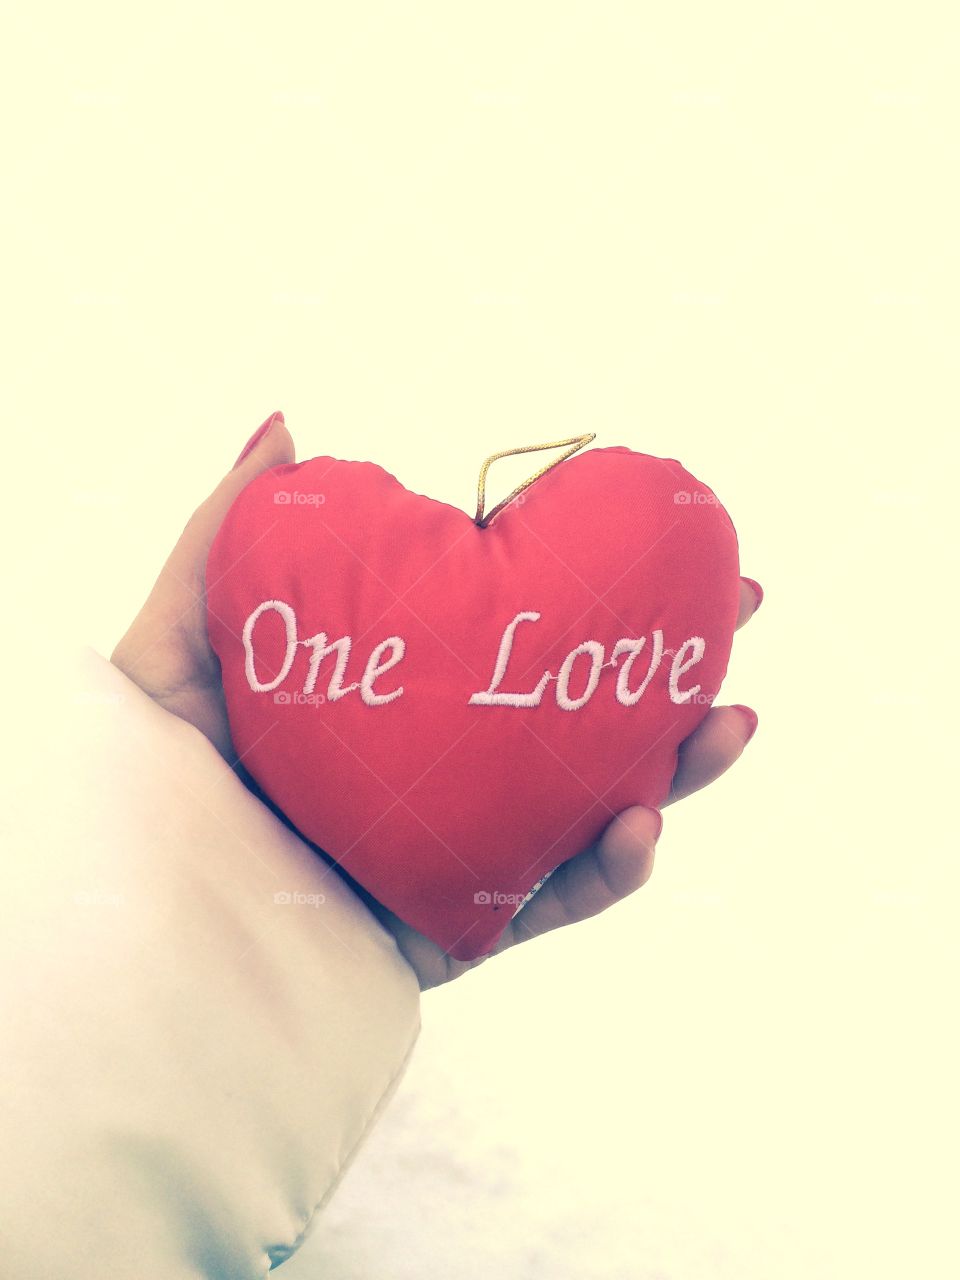 One Love Red Heart